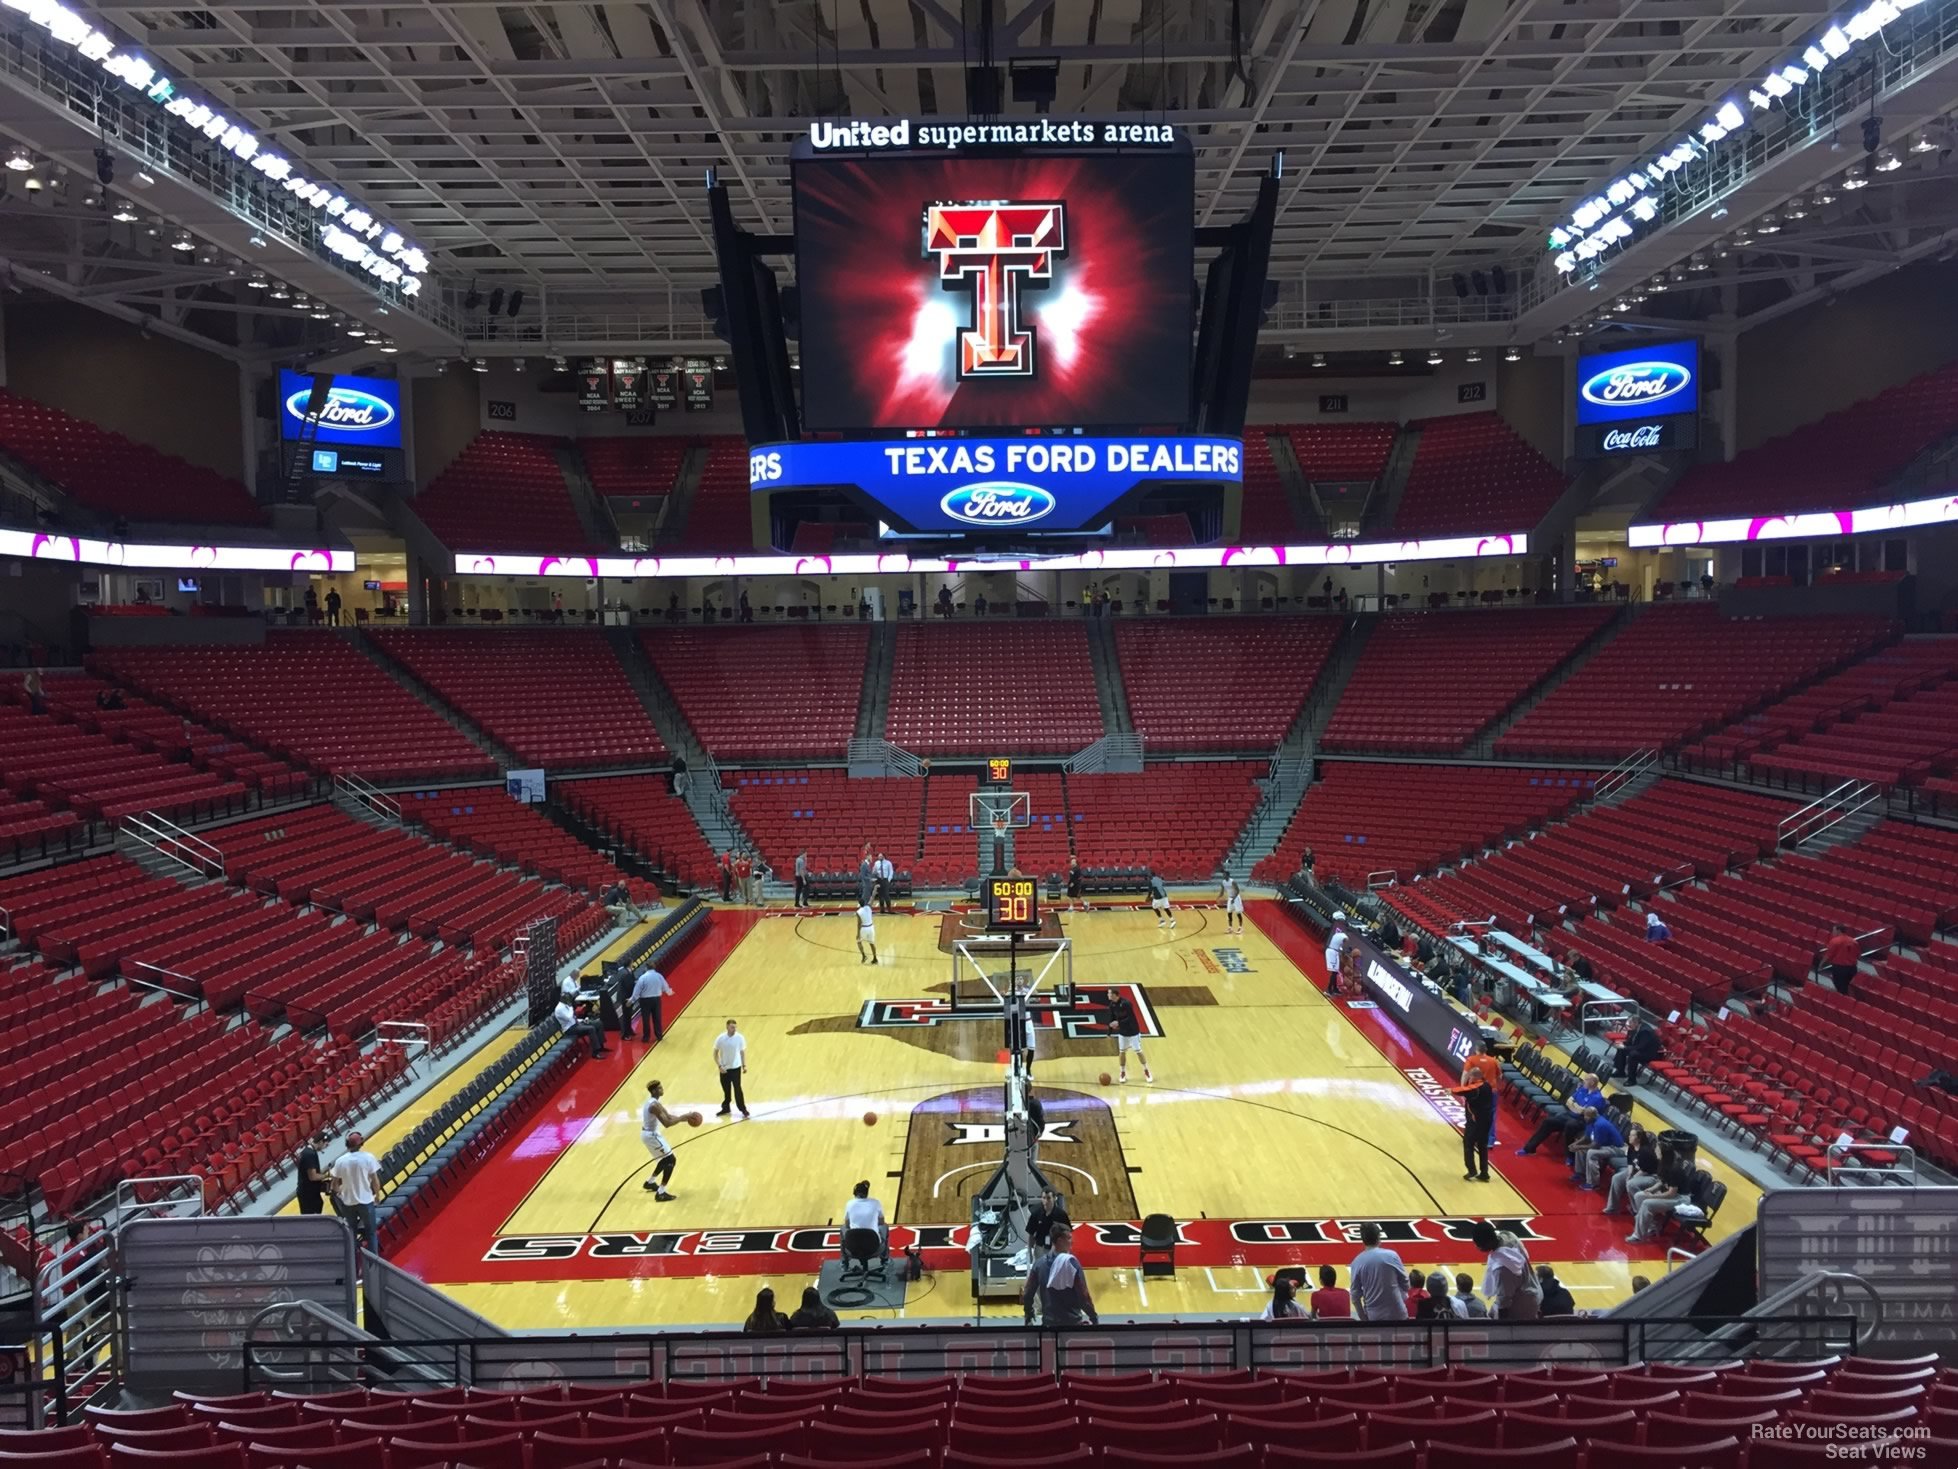 section 119, row 25 seat view  - united supermarkets arena